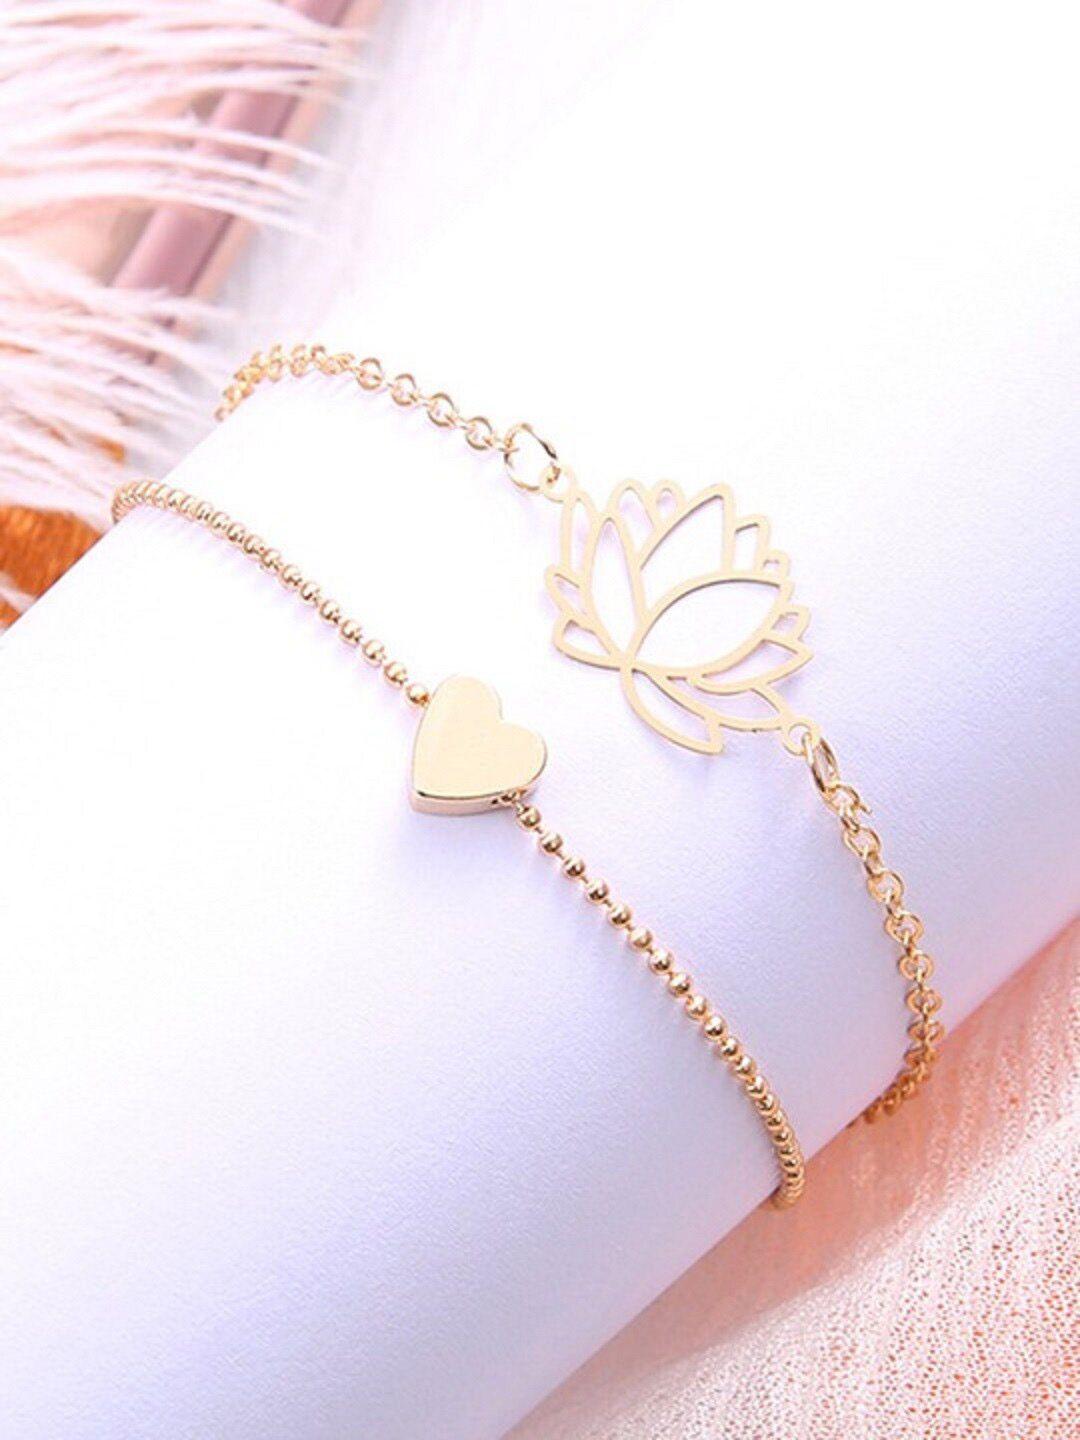 oomph set of 2 gold-plated lotus & heart shaped charm alloy anklets